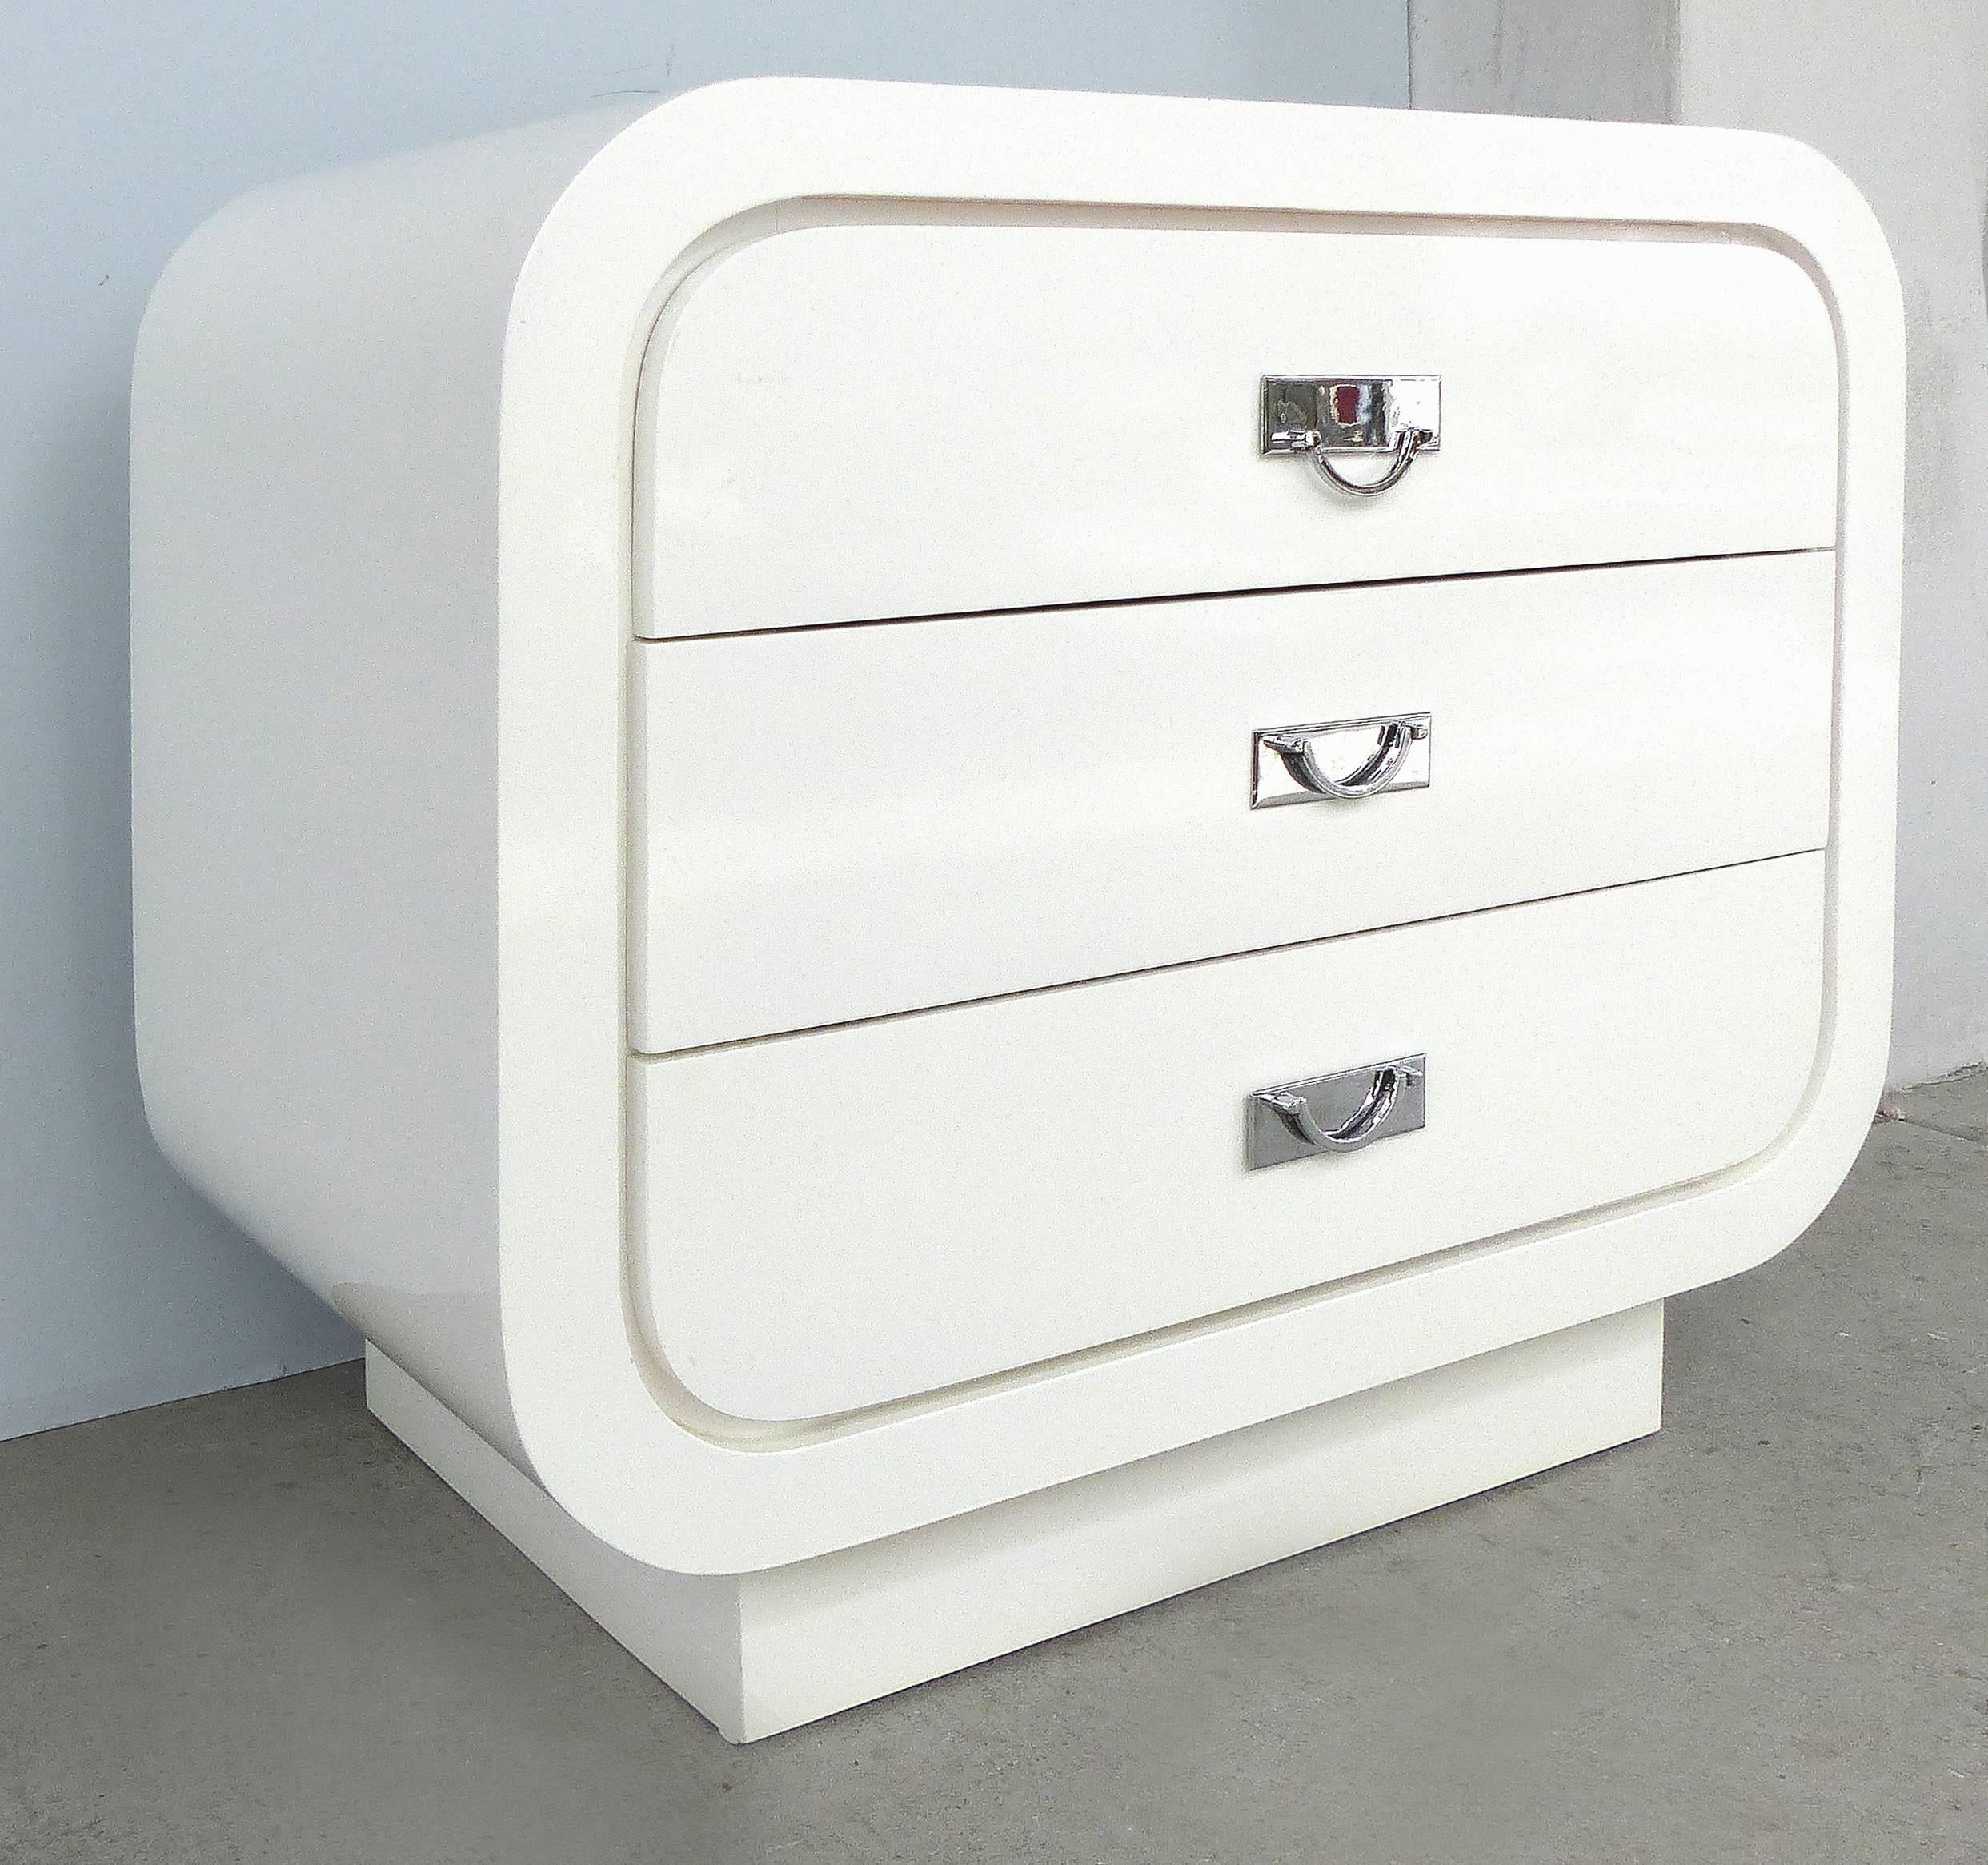 Late 20th Century Mid-Century Modern Lacquered Wood Three-Drawer Nightstands, Pair